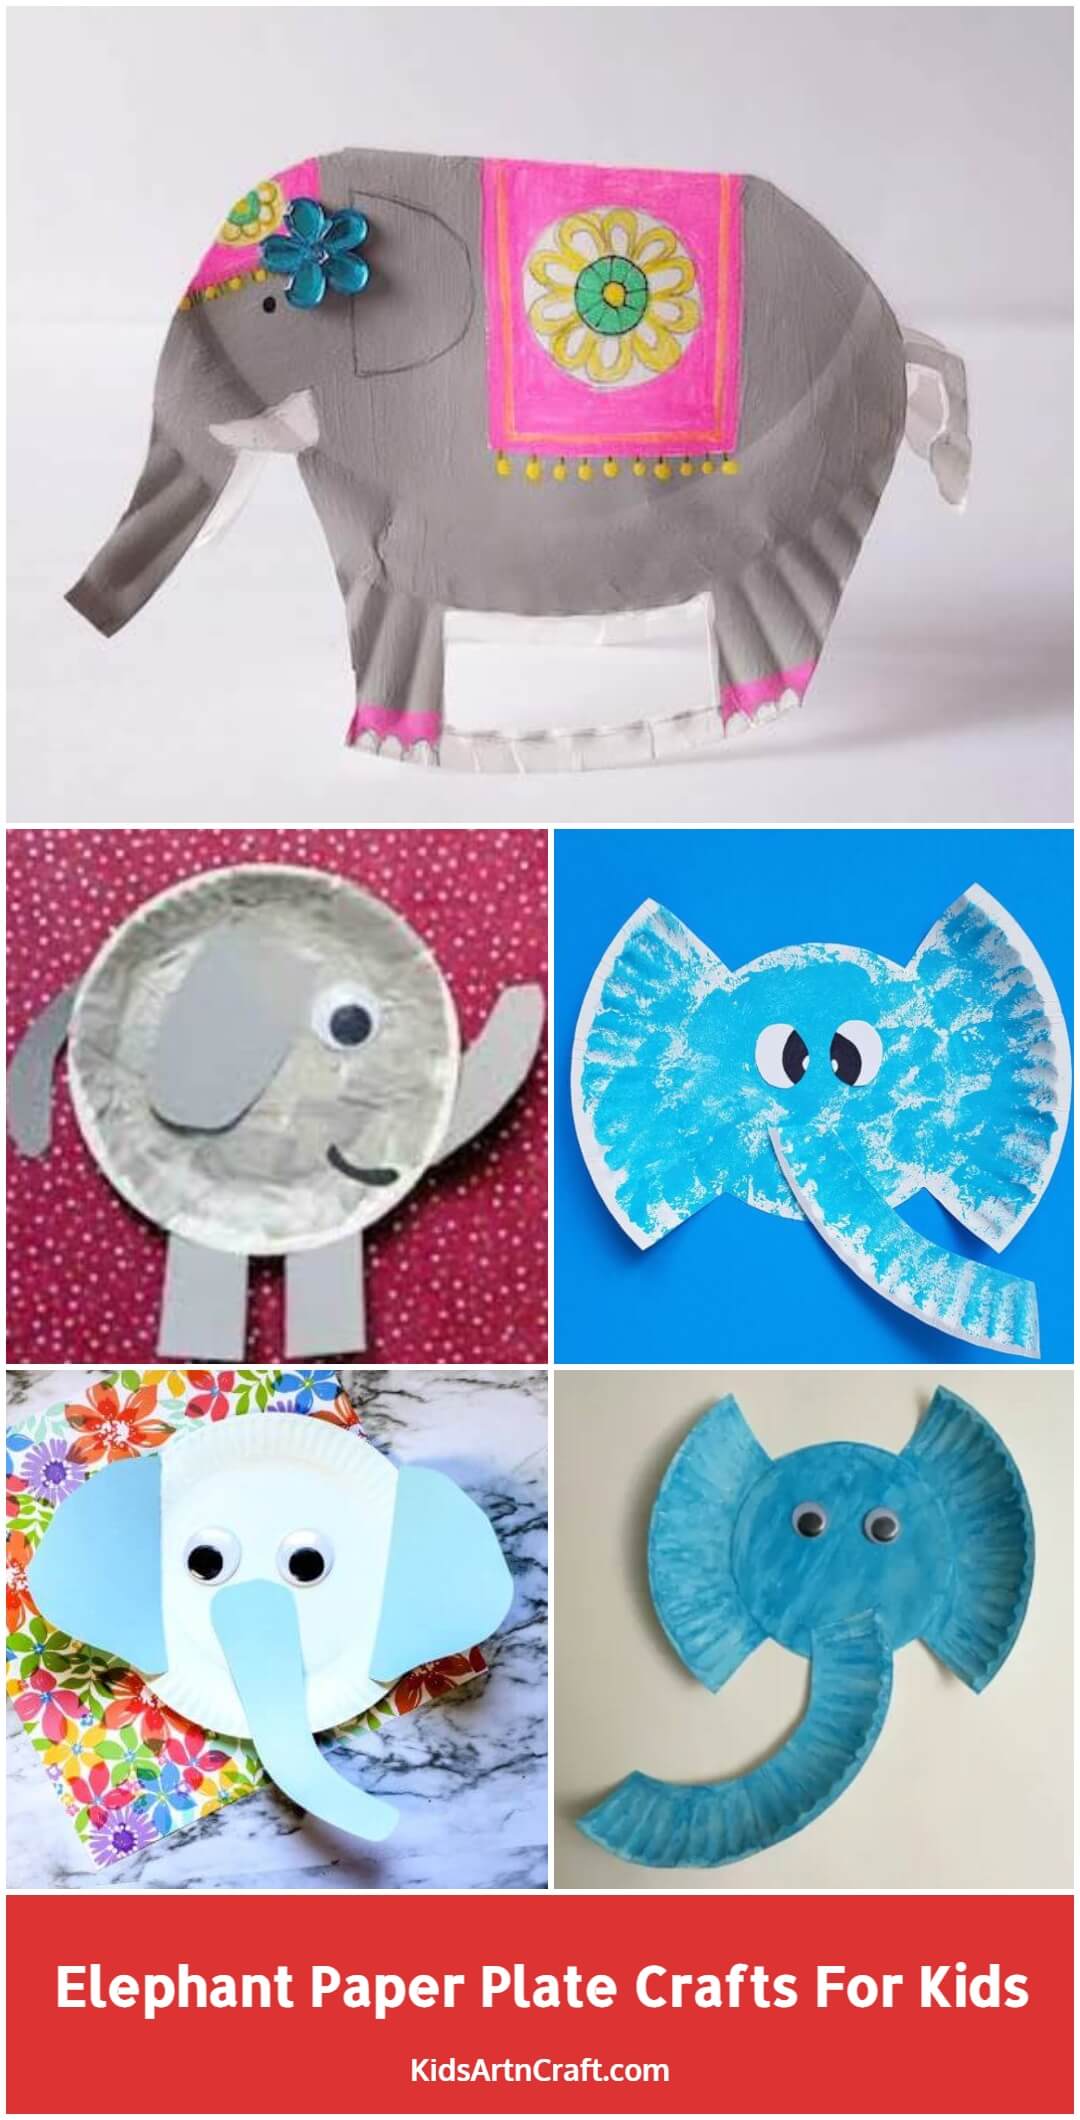 Elephant Paper Plate Crafts For Kids